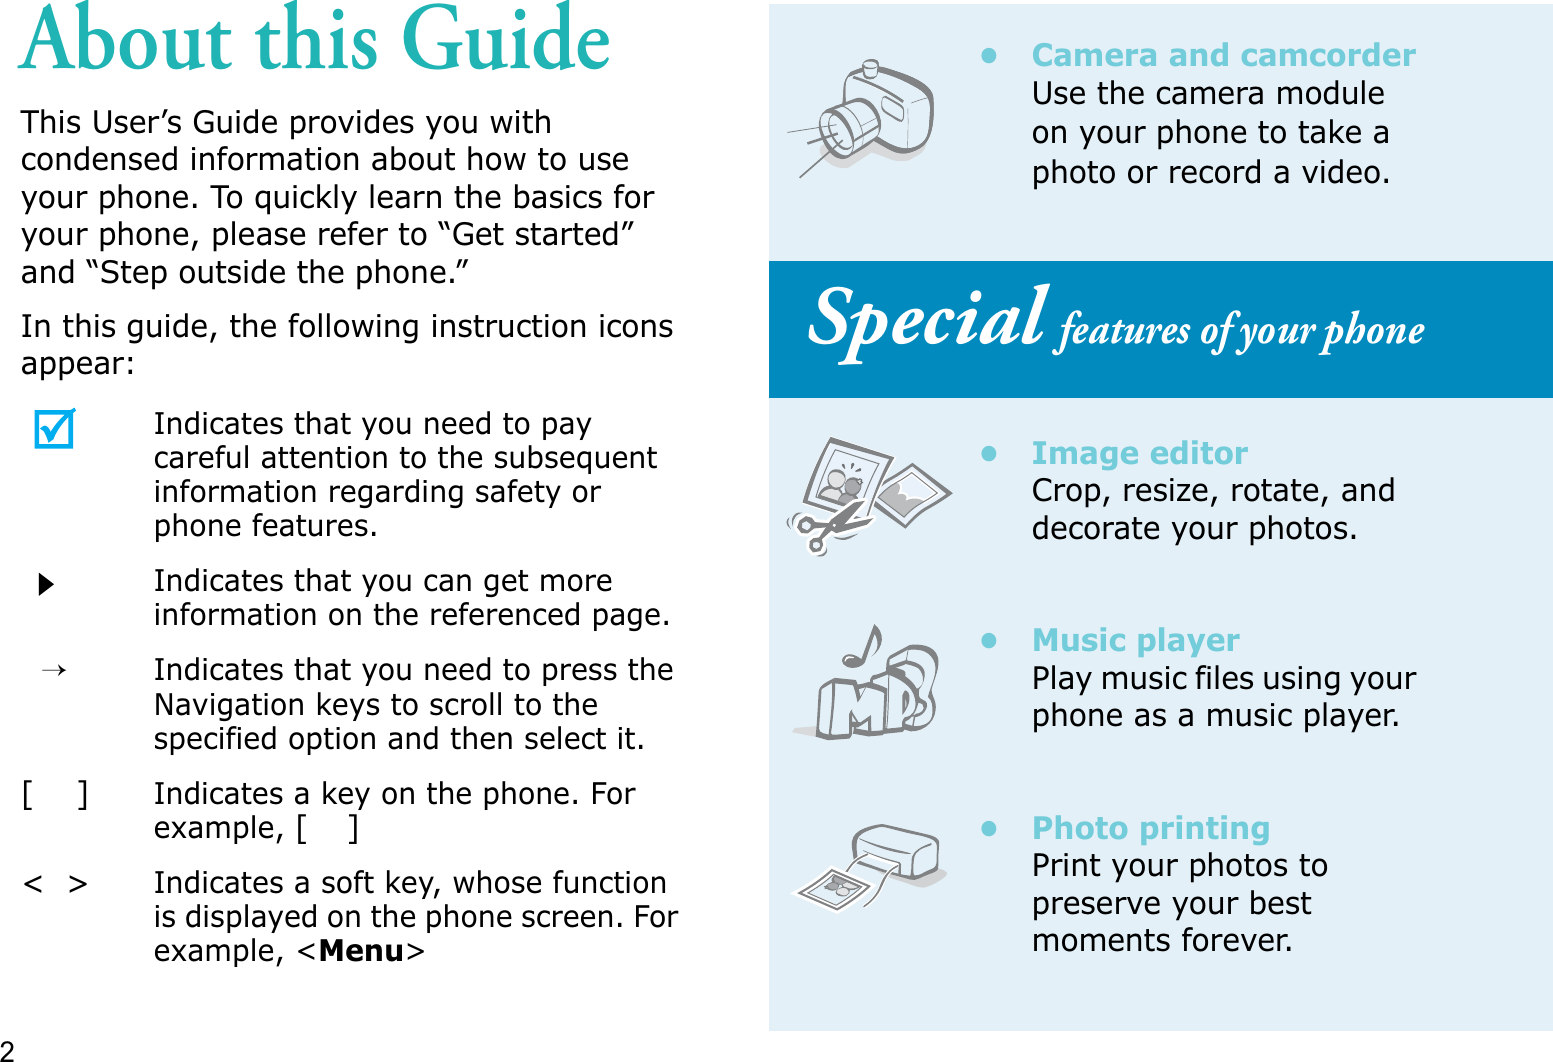 2About this GuideThis User’s Guide provides you with condensed information about how to use your phone. To quickly learn the basics for your phone, please refer to “Get started” and “Step outside the phone.”In this guide, the following instruction icons appear:Indicates that you need to pay careful attention to the subsequent information regarding safety or phone features.Indicates that you can get more information on the referenced page.→Indicates that you need to press the Navigation keys to scroll to the specified option and then select it.[    ]Indicates a key on the phone. For example,[]&lt;  &gt;Indicates a soft key, whose function is displayed on the phone screen. For example, &lt;Menu&gt;• Camera and camcorderUse the camera module on your phone to take a photo or record a video. Special features of your phone• Image editorCrop, resize, rotate, and decorate your photos.•Music playerPlay music files using your phone as a music player.• Photo printingPrint your photos to preserve your best moments forever.